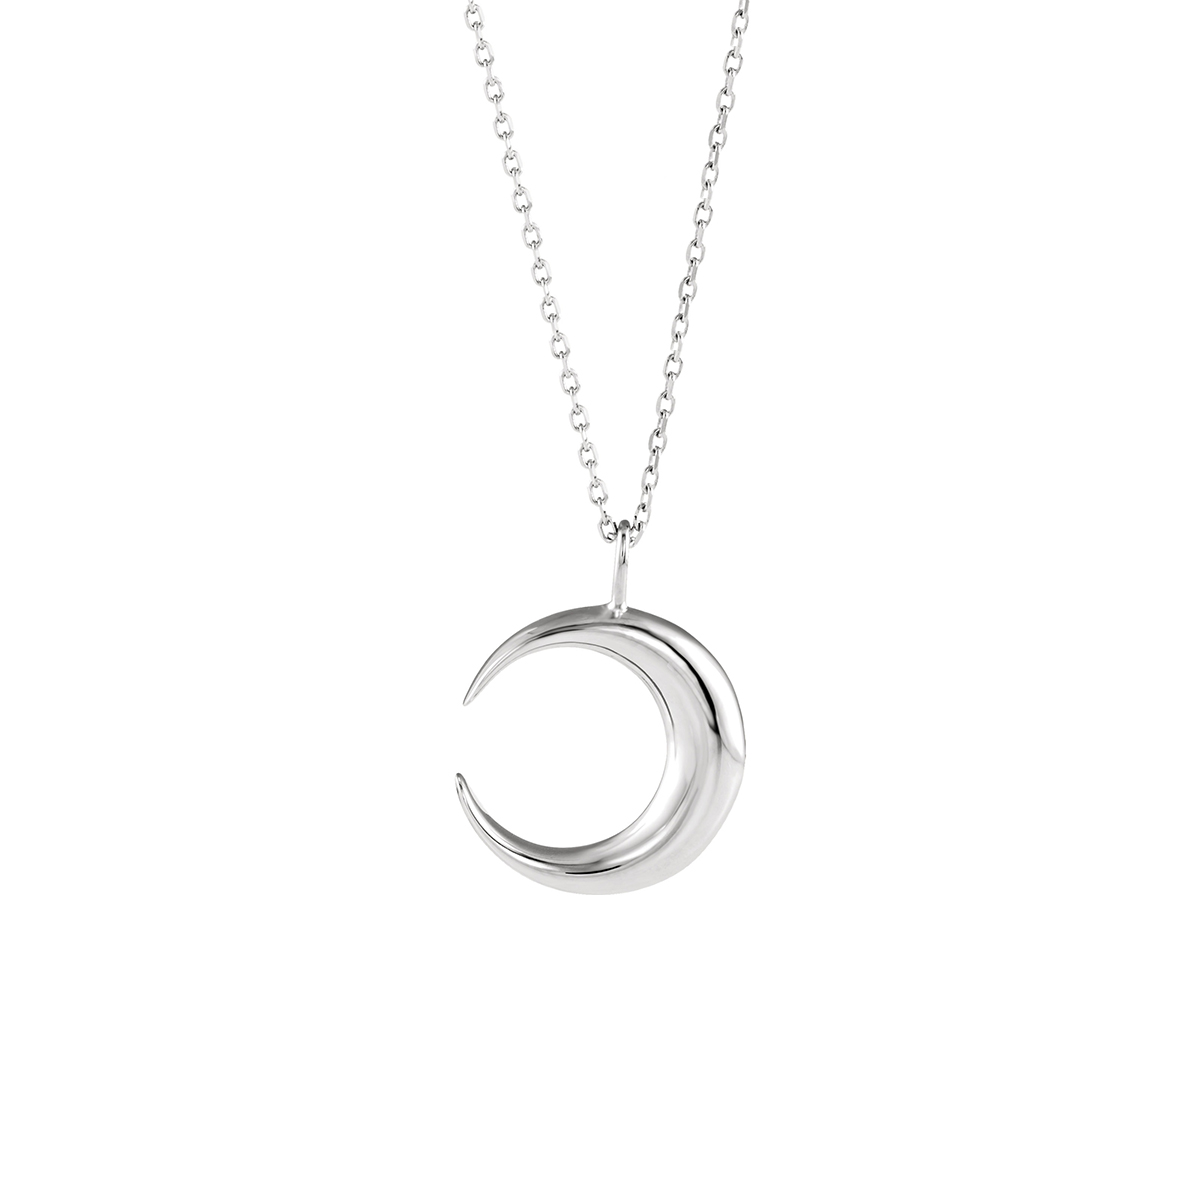 14K White Gold Crescent Moon Pendant and Chain - Josephs Jewelers